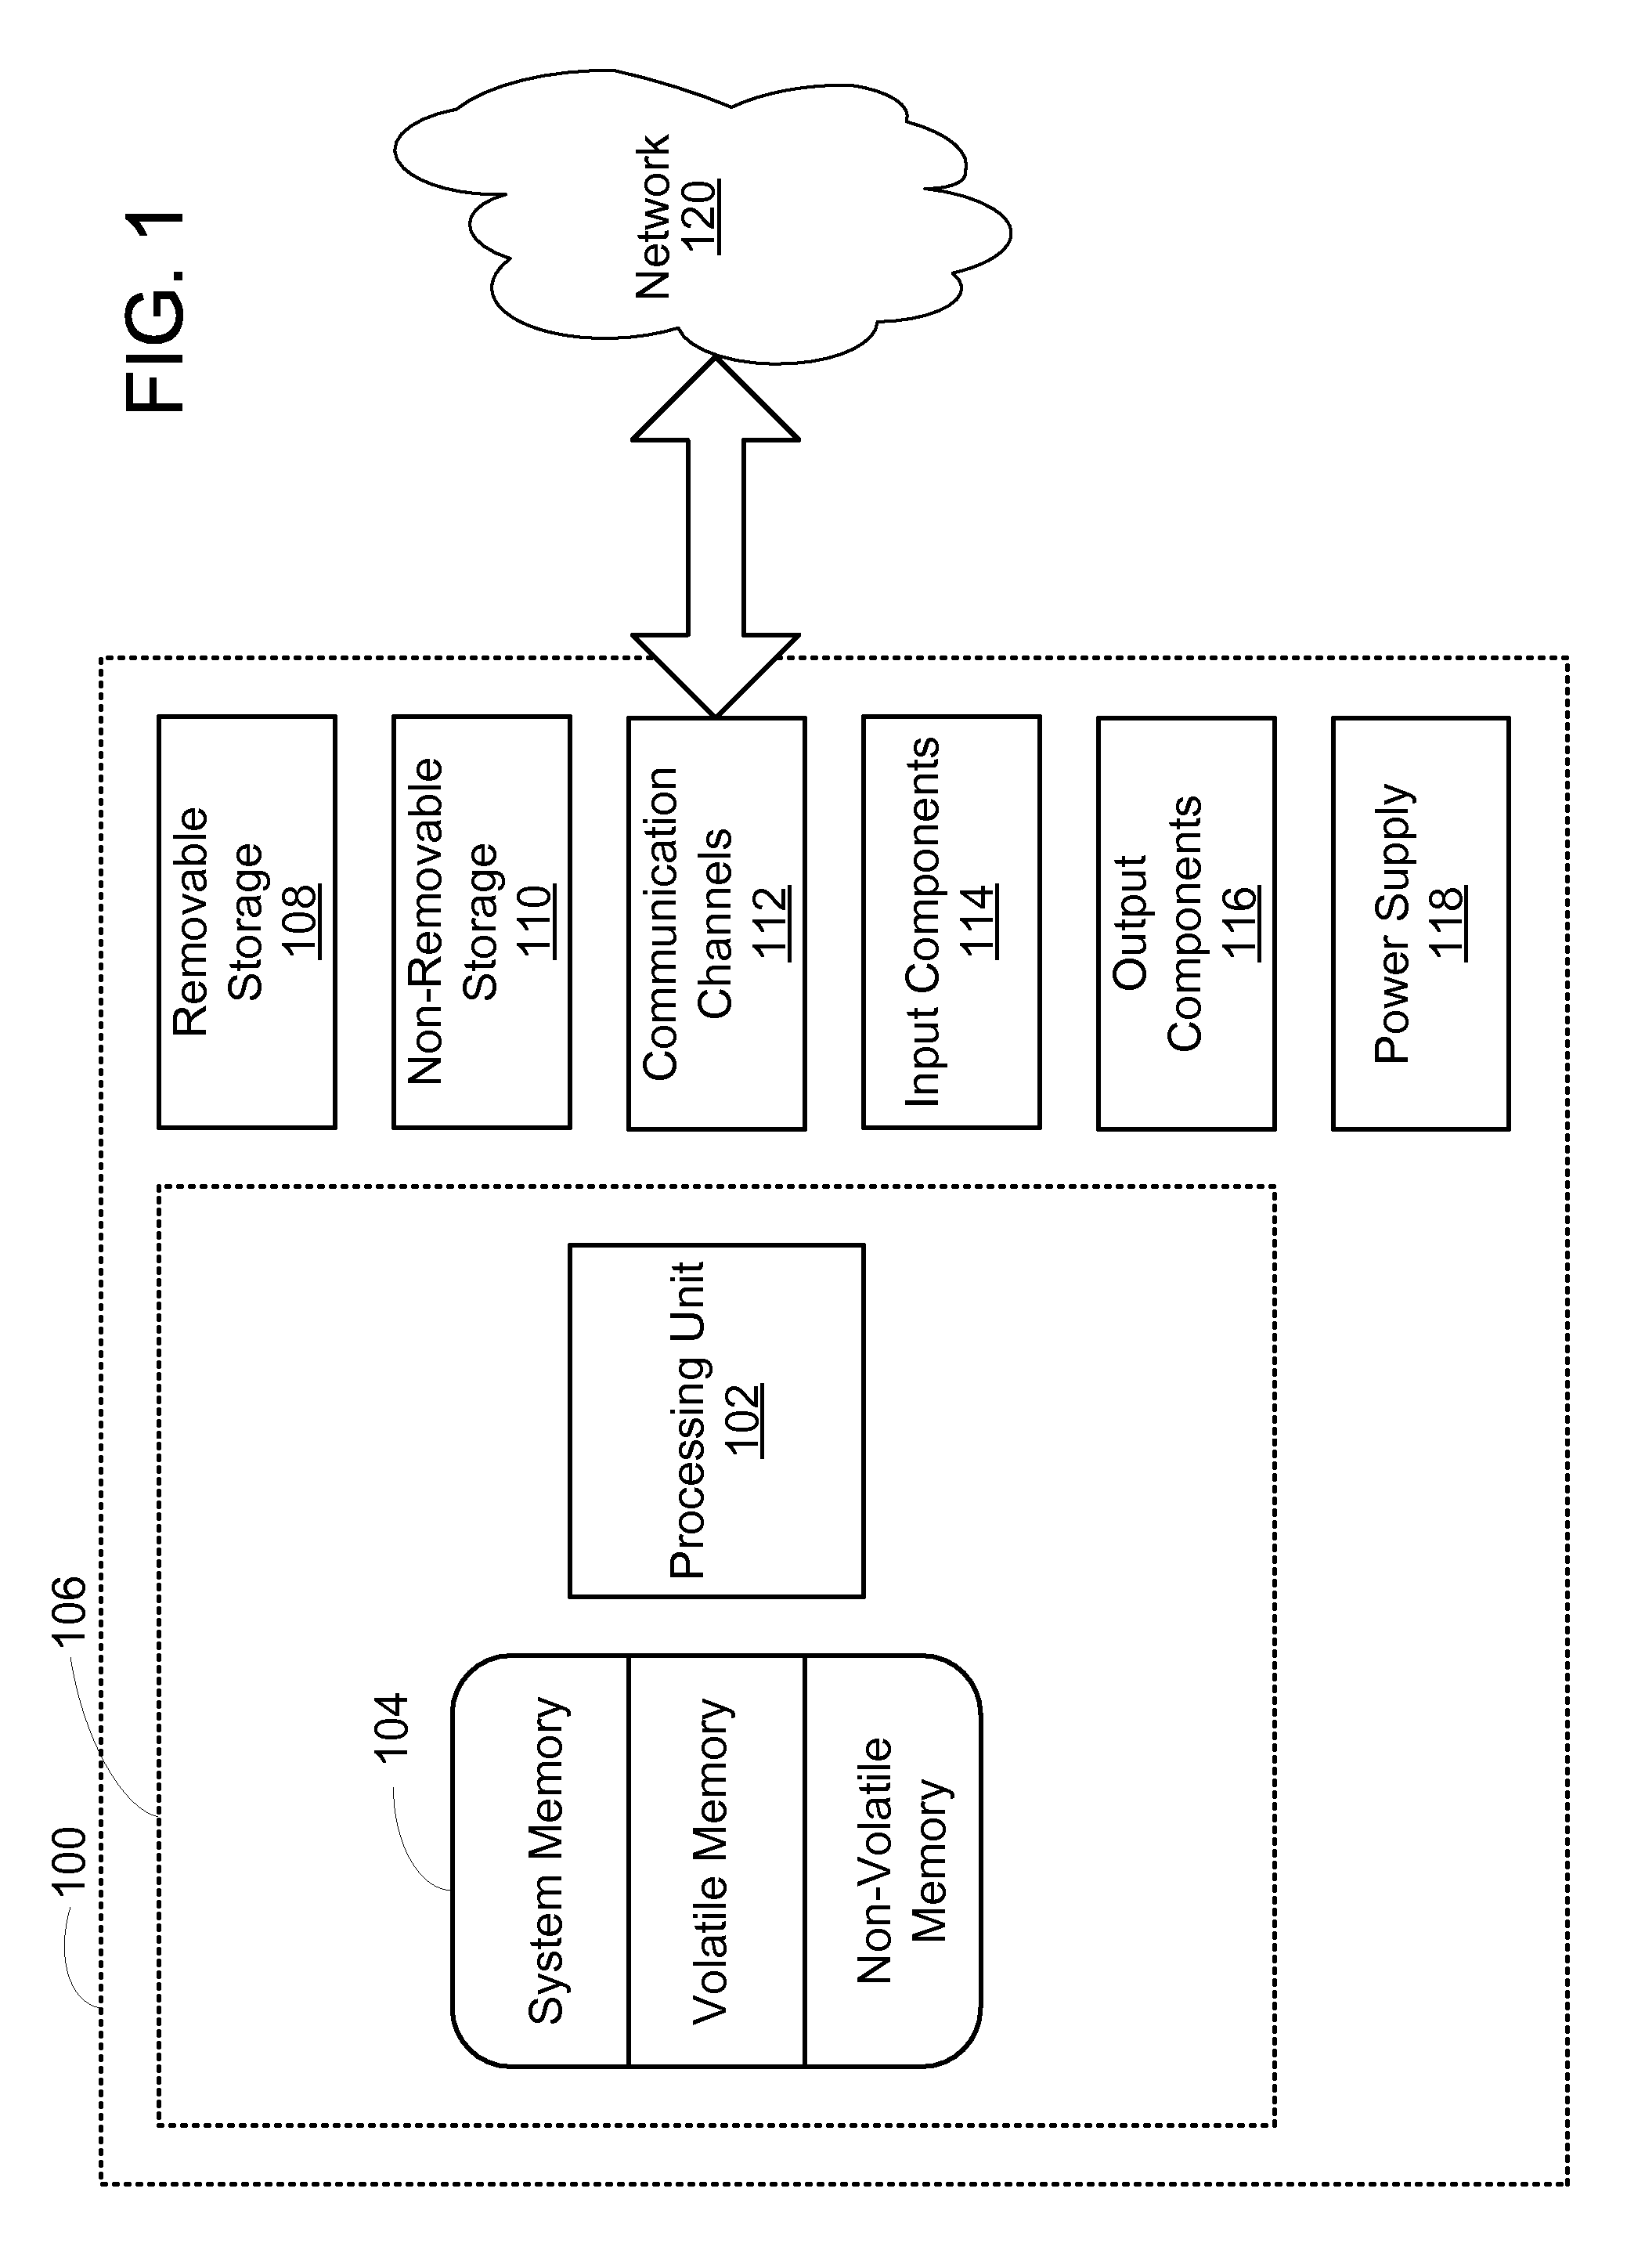 Methods and Systems for Unilateral Authentication of Messages